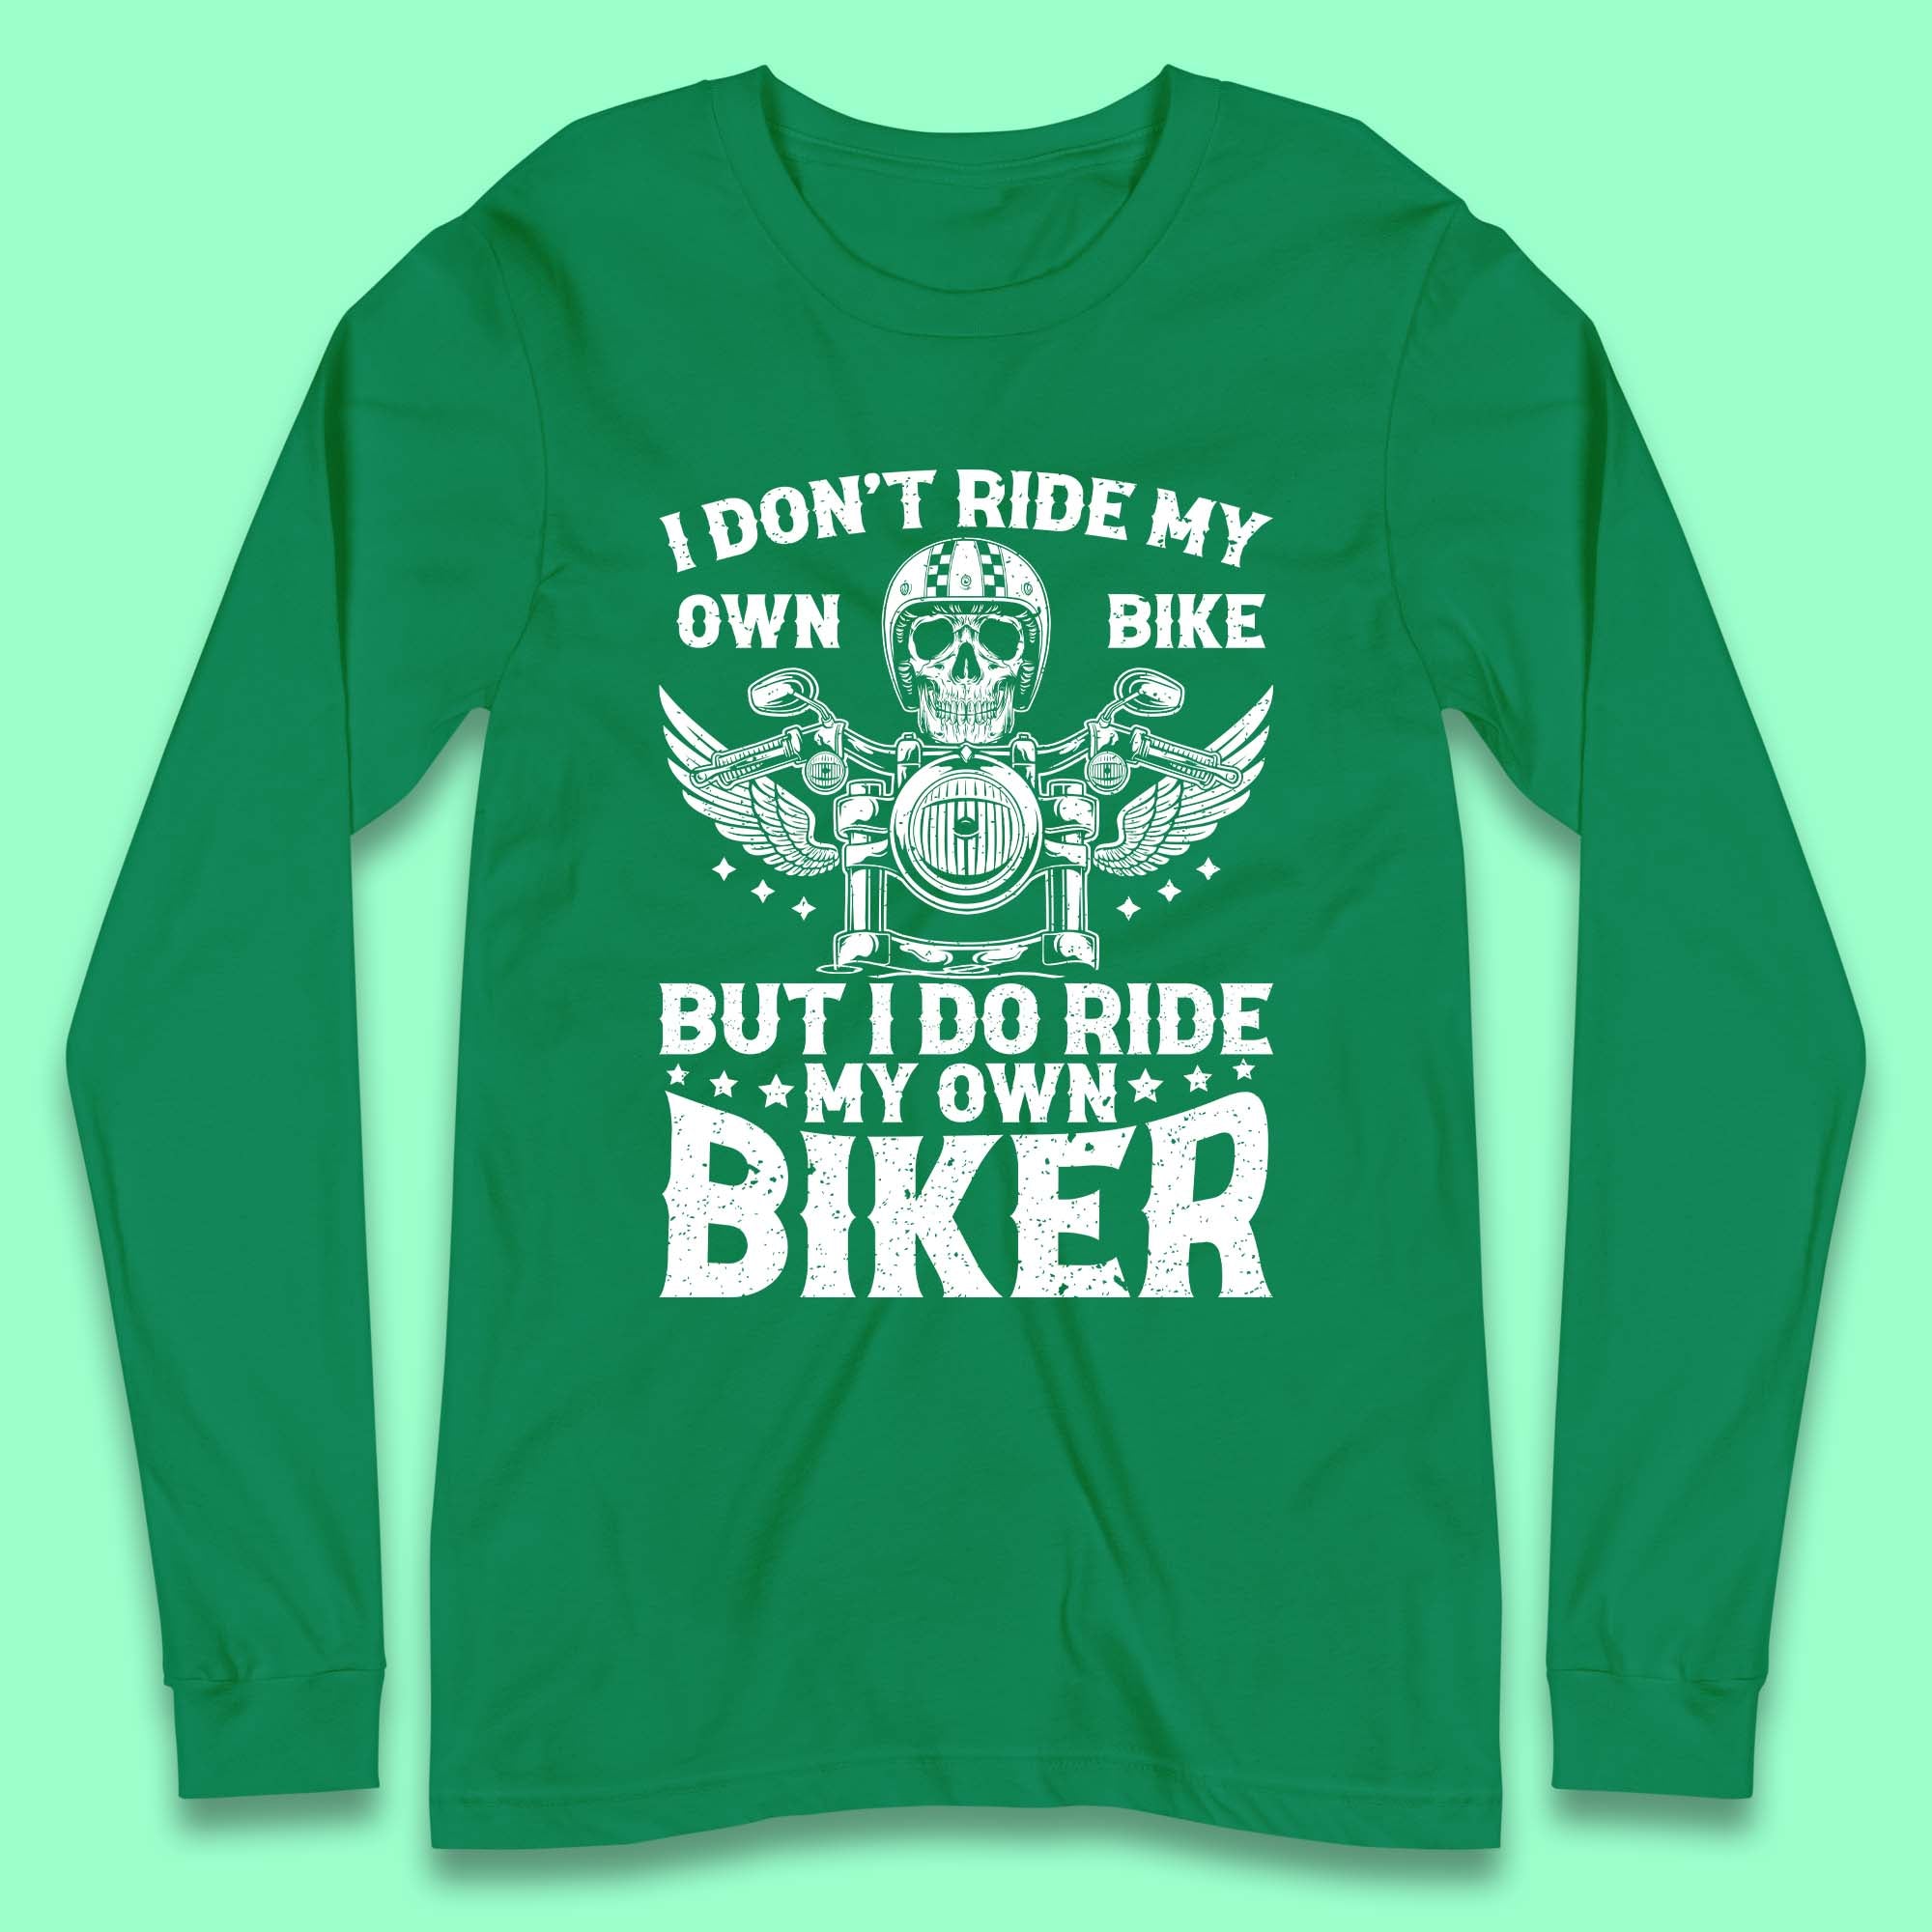 Motorcyclist Quotes Long Sleeve T-Shirt